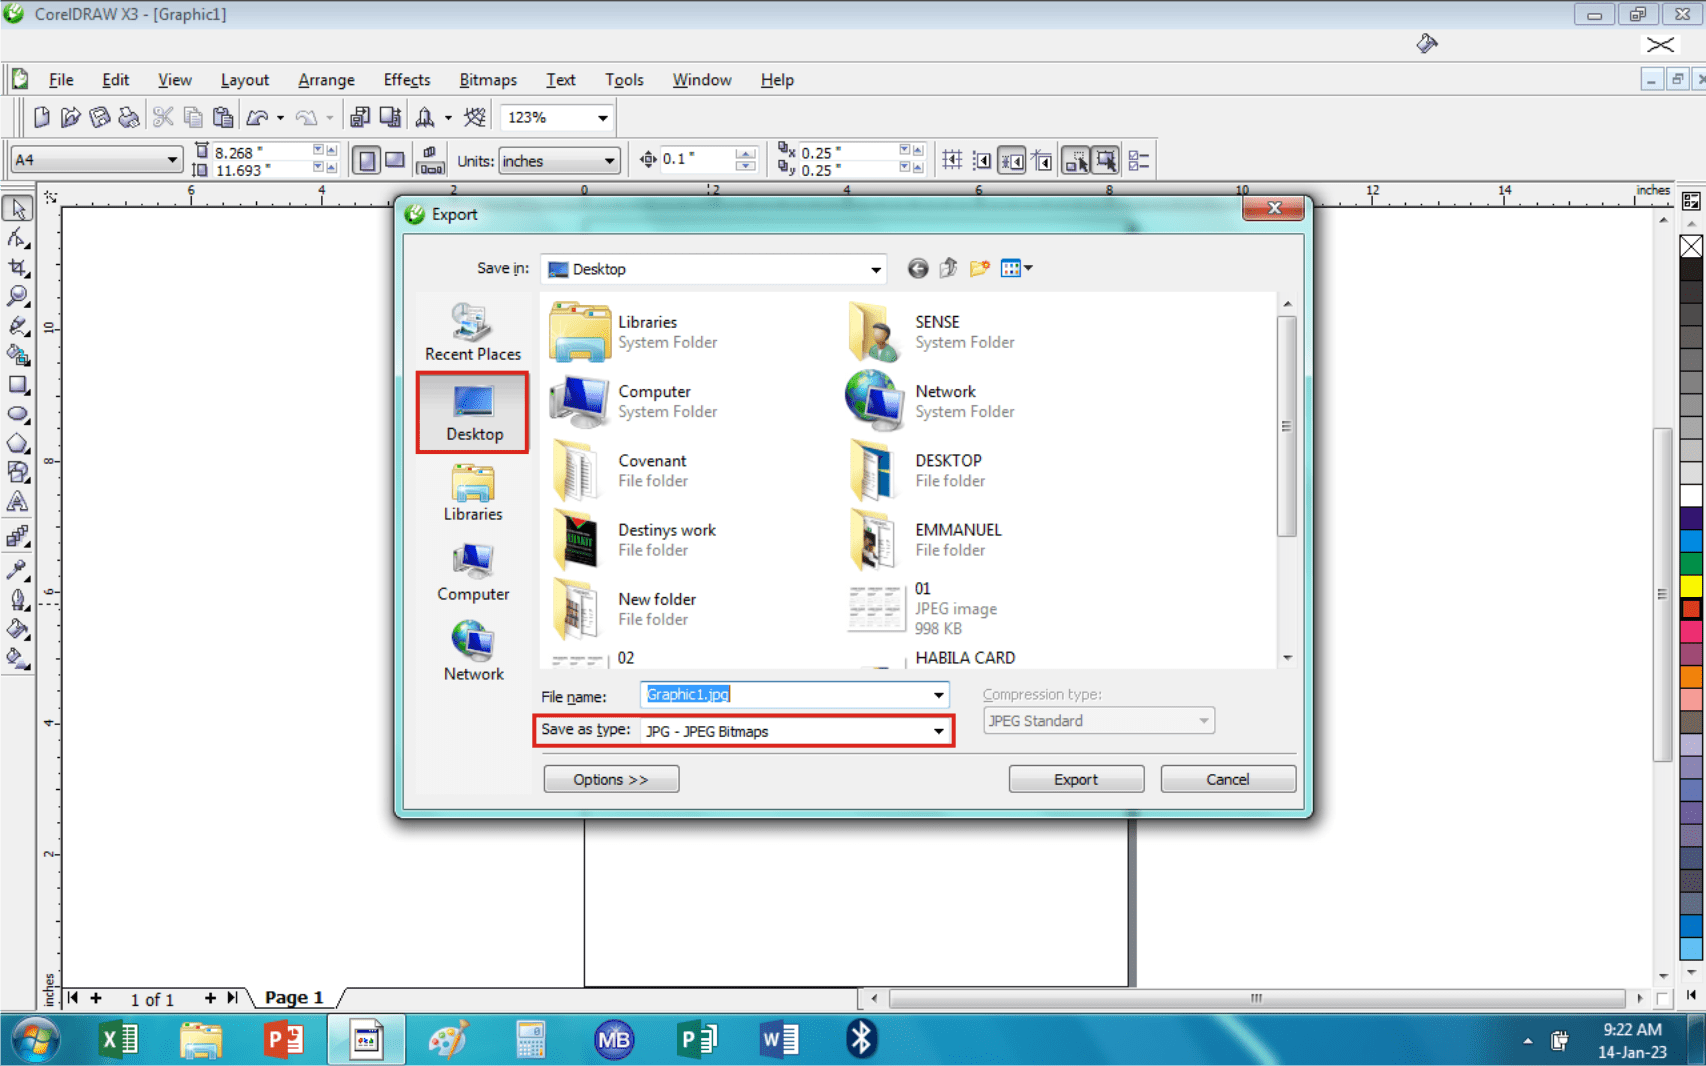 How to Export from CorelDraw to Desktop 4 - Tundenny Blog